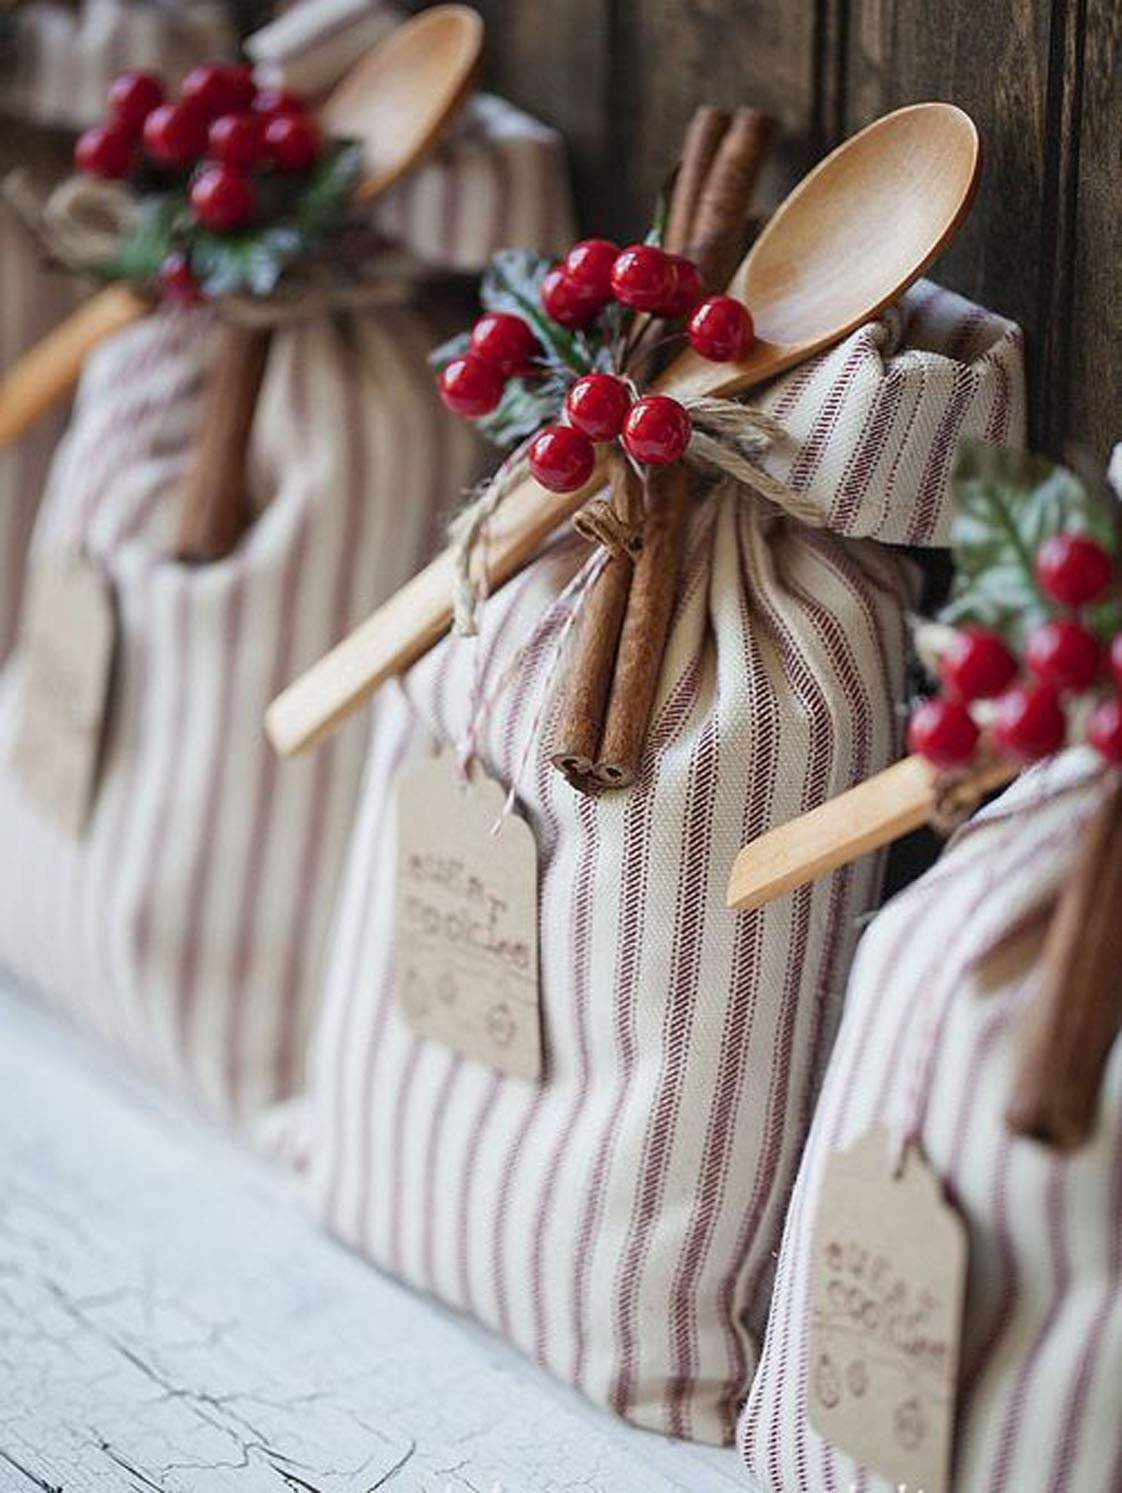 25 amazing DIY gifts people will actually want -   22 fabric crafts Homemade christmas gifts
 ideas